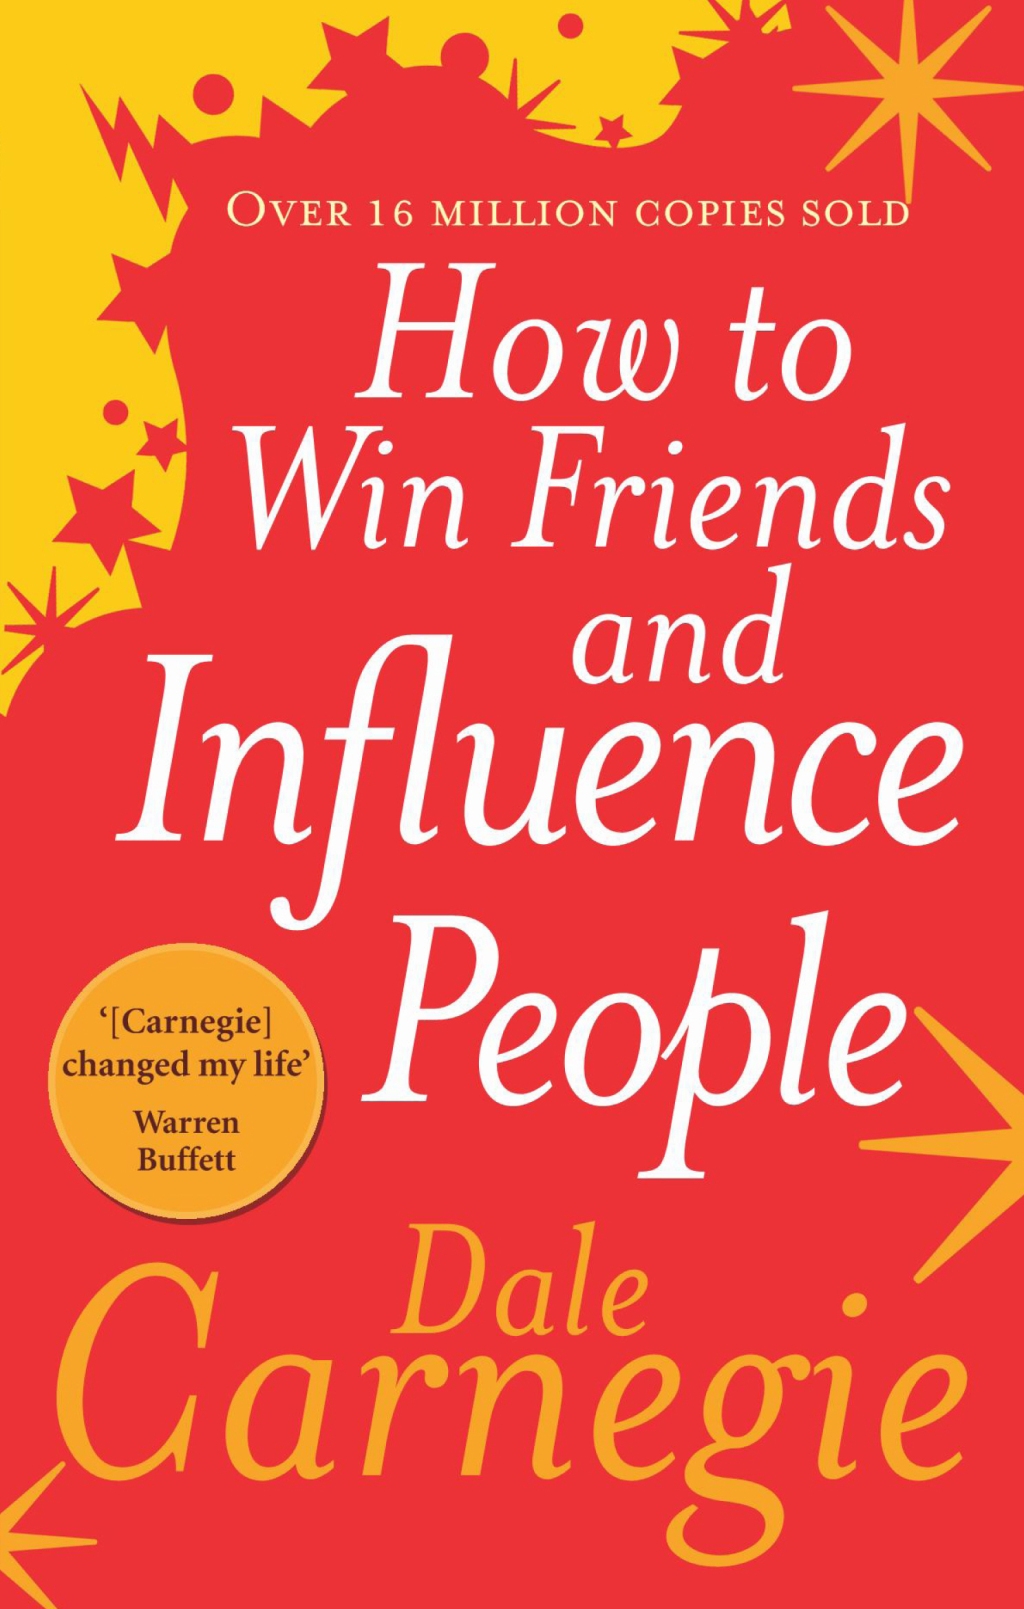 How to Win Friends and Influence People by Dale Carnegie – A Book Review